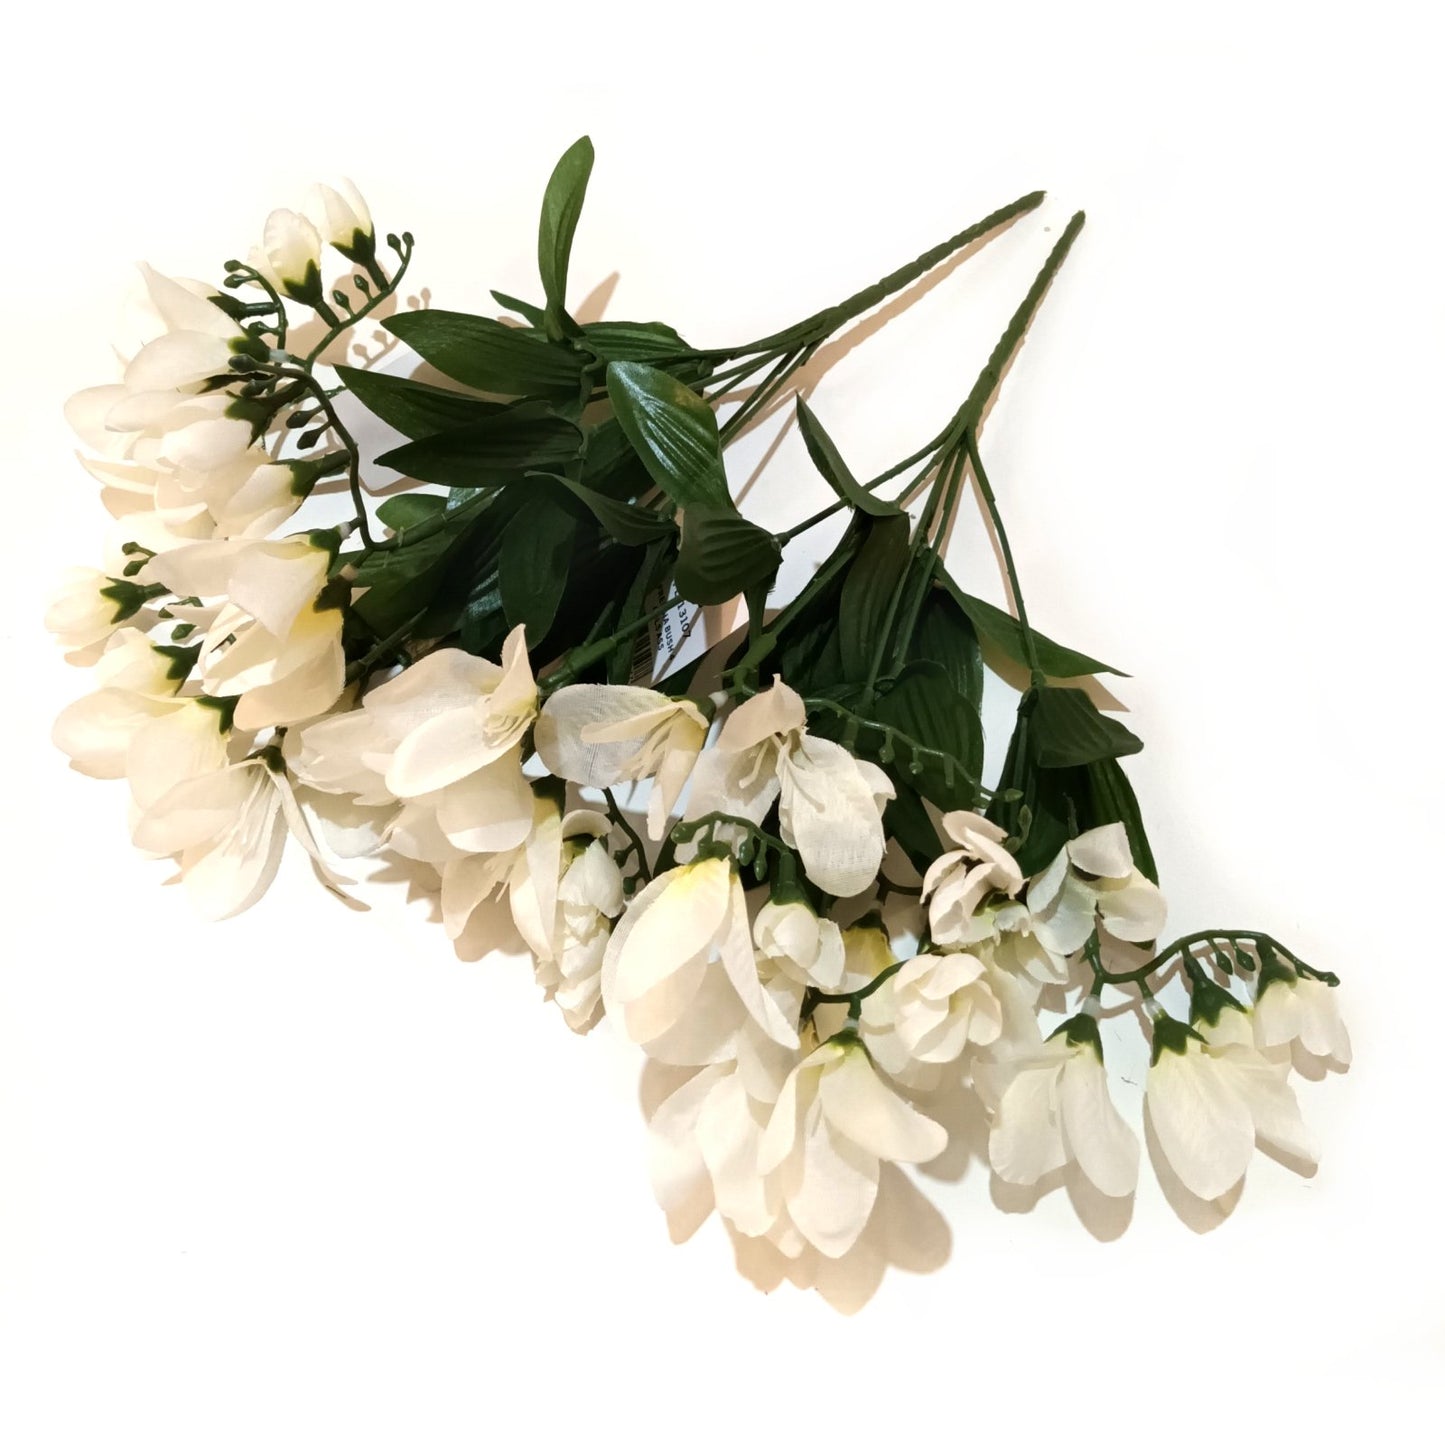 Artificial Freesia Bush with White Flowers 35cm